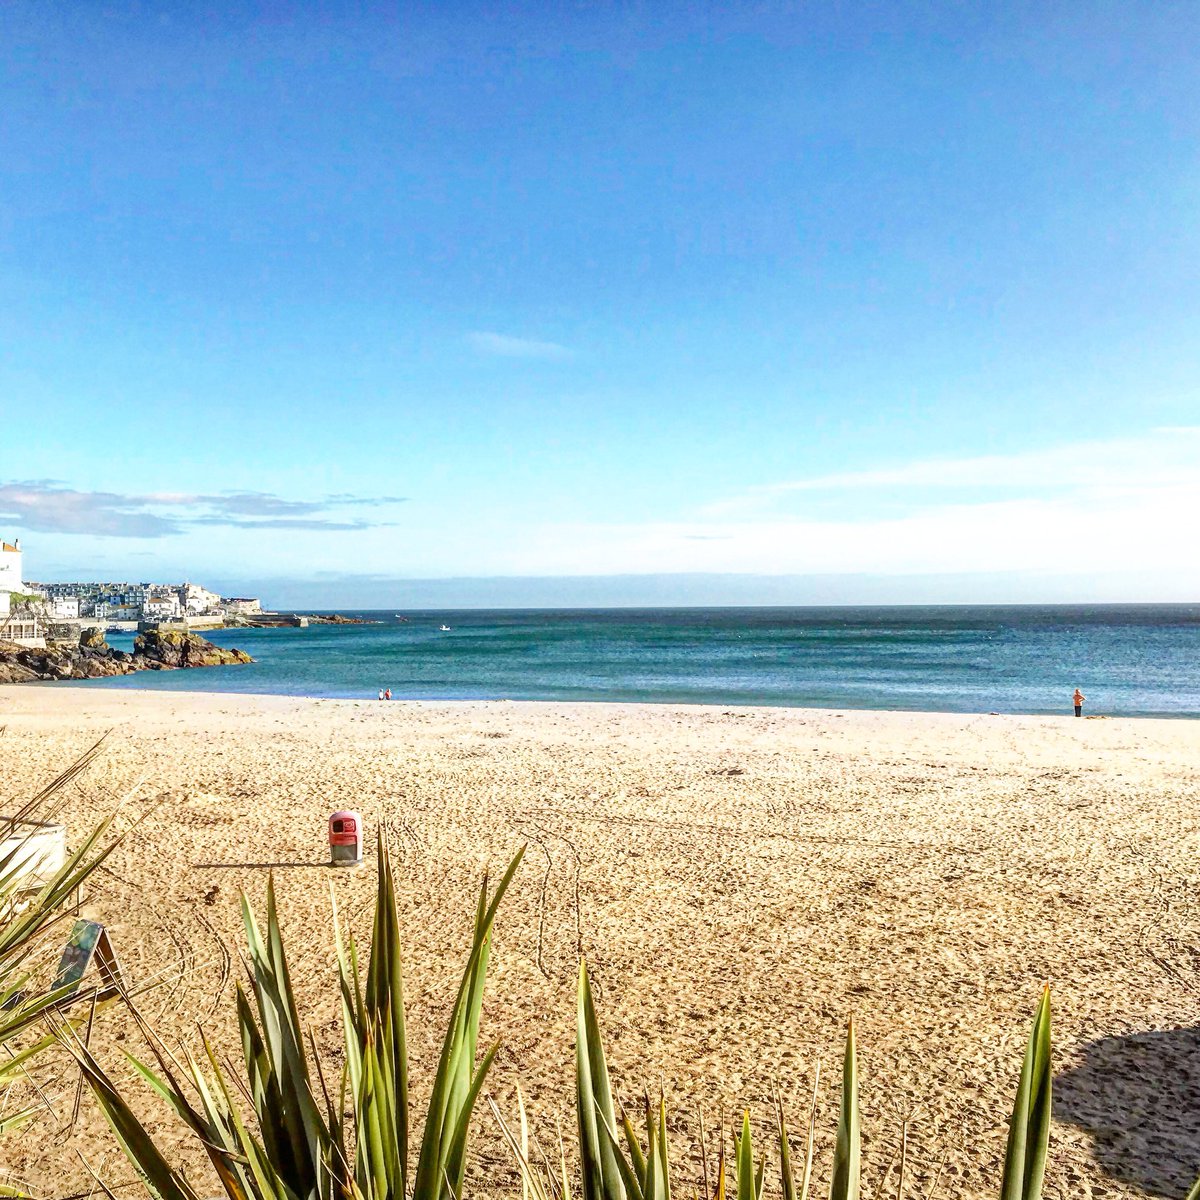 So warm today, It looks like a summer day! @sostives #autumnvibes #porthminsterbeach #cornwall #stives #sunnyday #holidaycottages